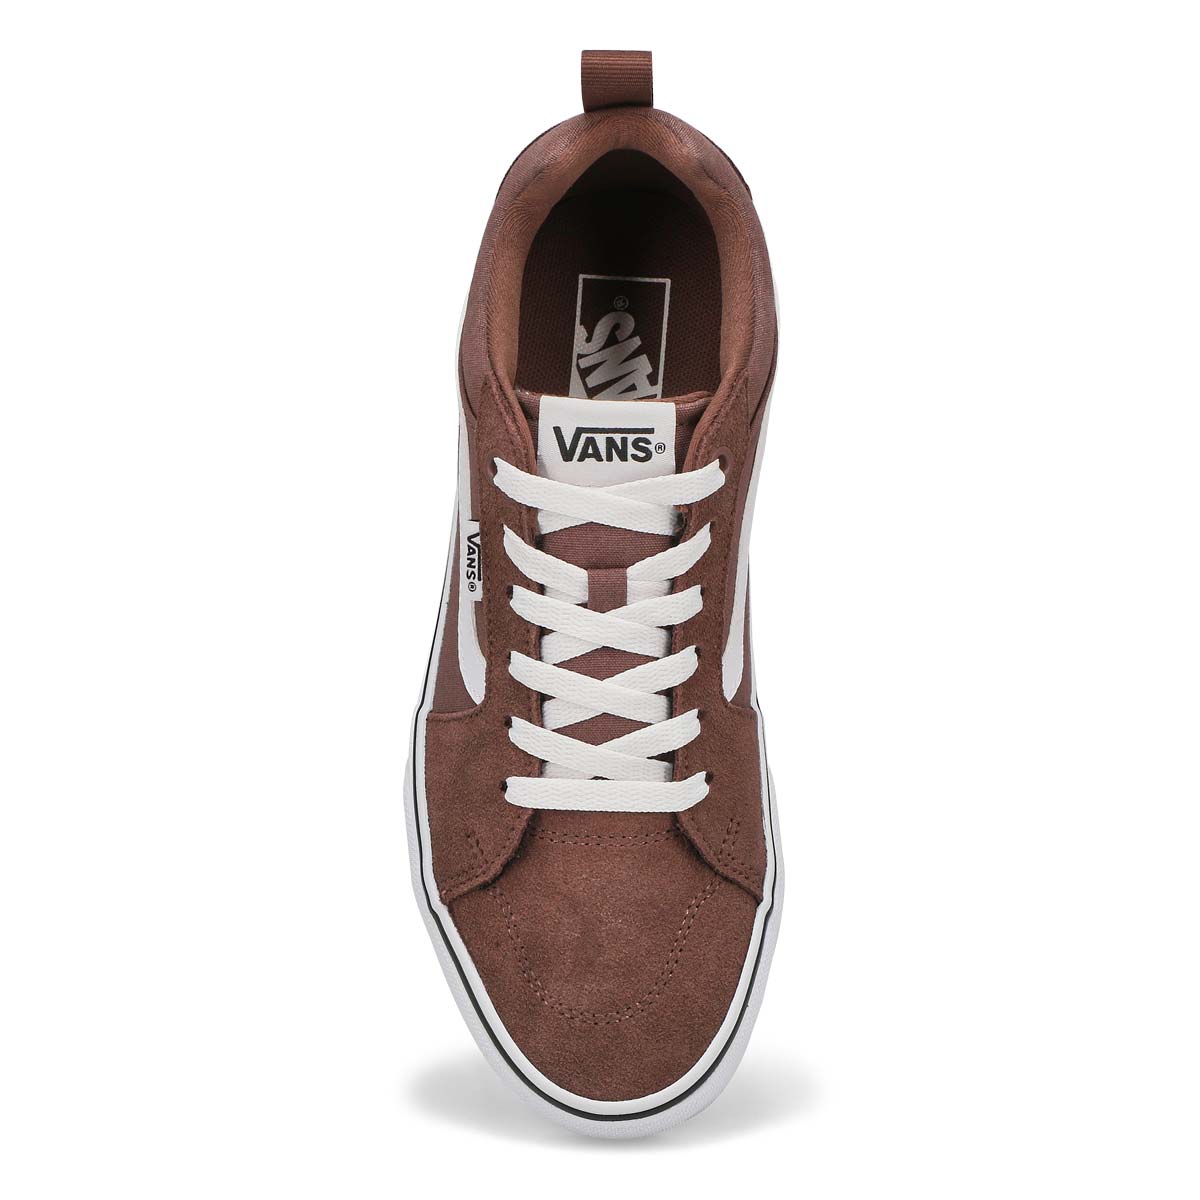 Mens Filmore Lace Up Sneaker - Taupe/White